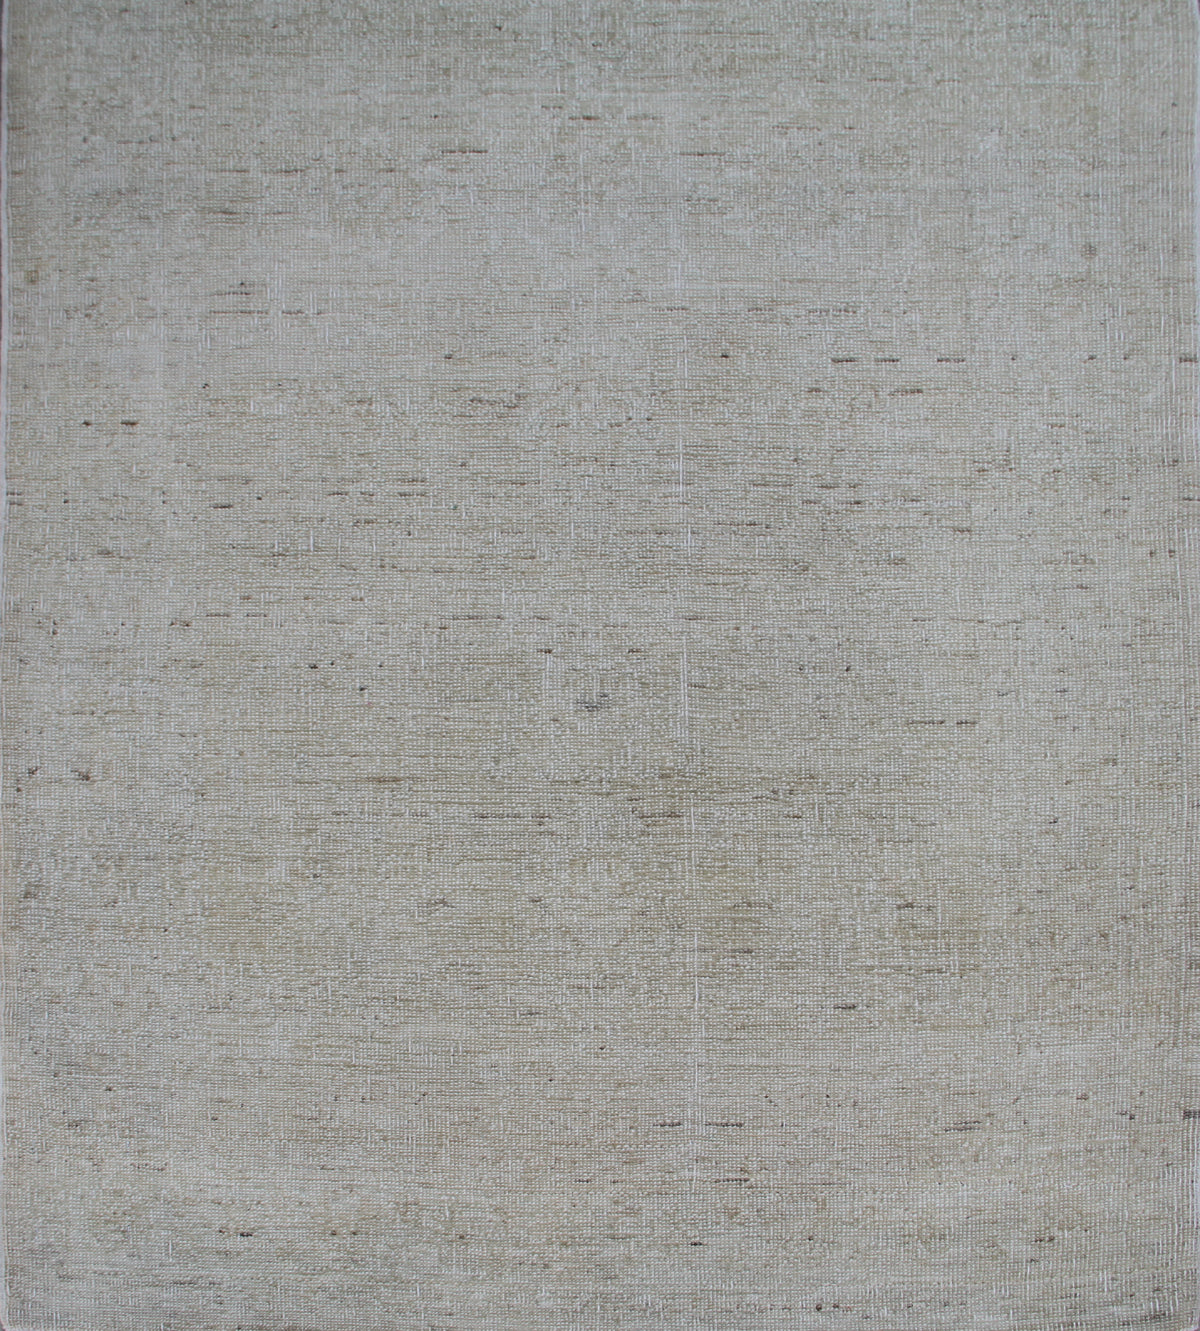 3x20 Very Pale Washed-out Agra Design Ariana Traditional Runner Rug